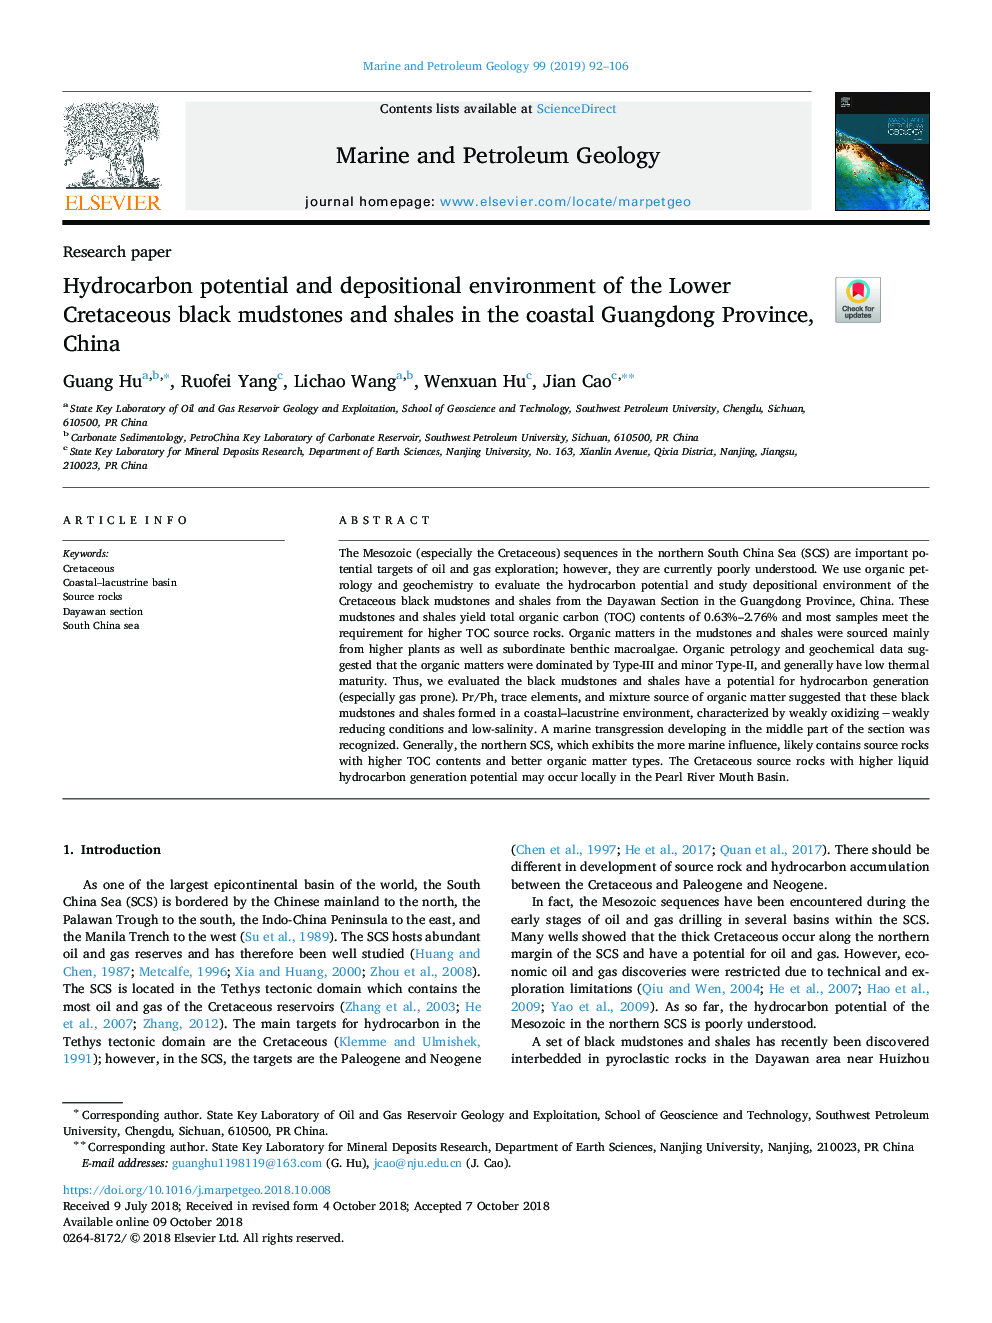 Hydrocarbon potential and depositional environment of the Lower Cretaceous black mudstones and shales in the coastal Guangdong Province, China